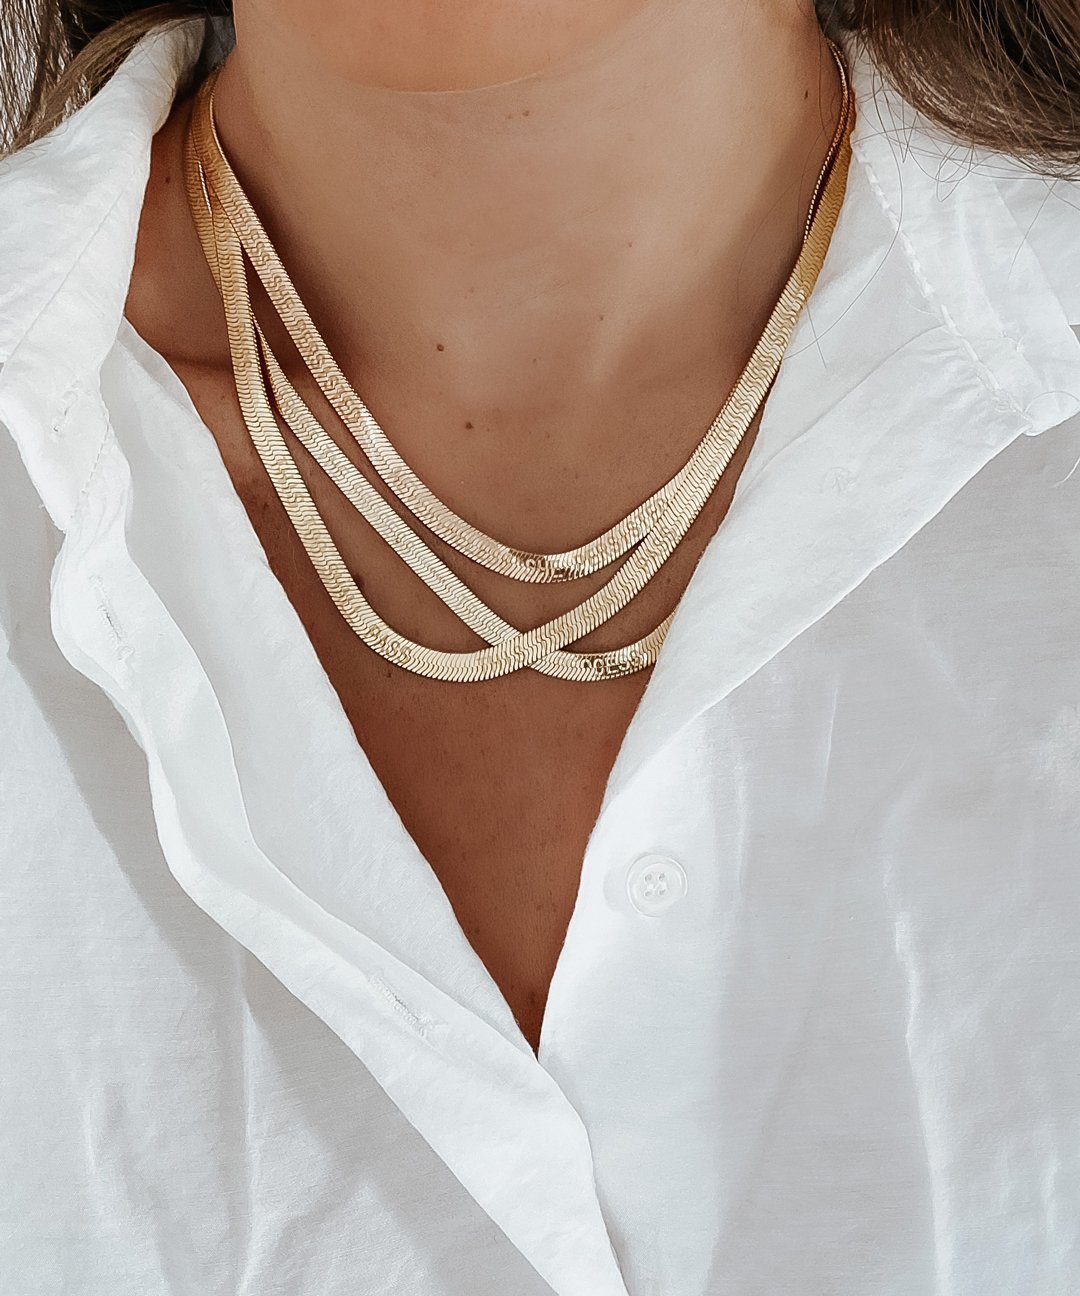 THIS TOO SHALL PASS Herringbone Necklace Necklaces The Giving Keys 